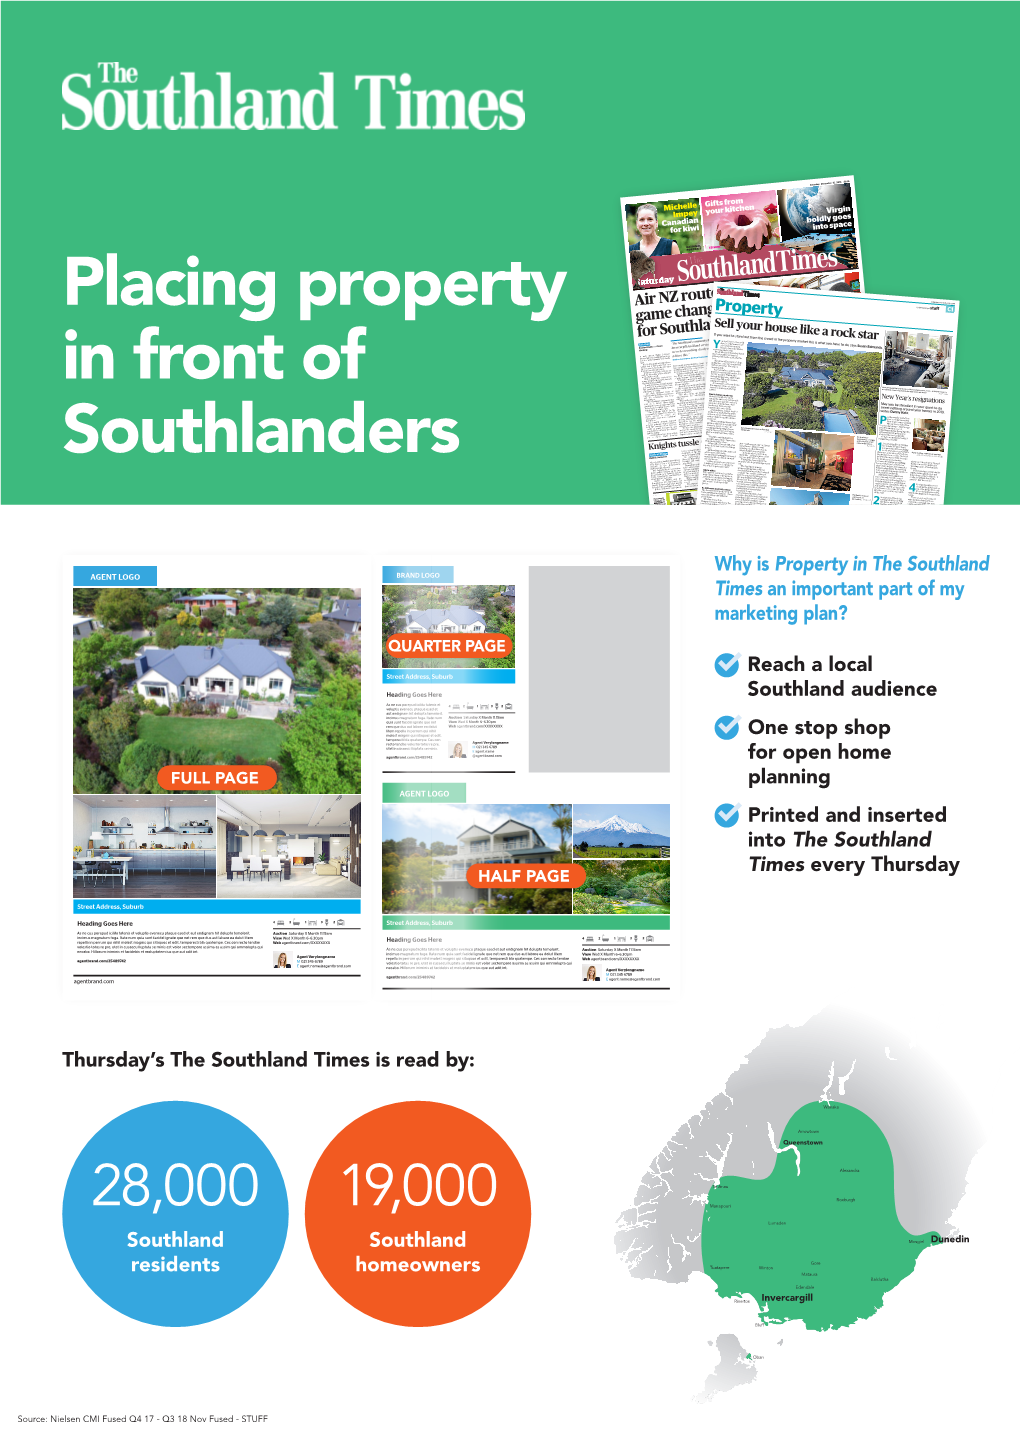 Placing Property in Front of Southlanders